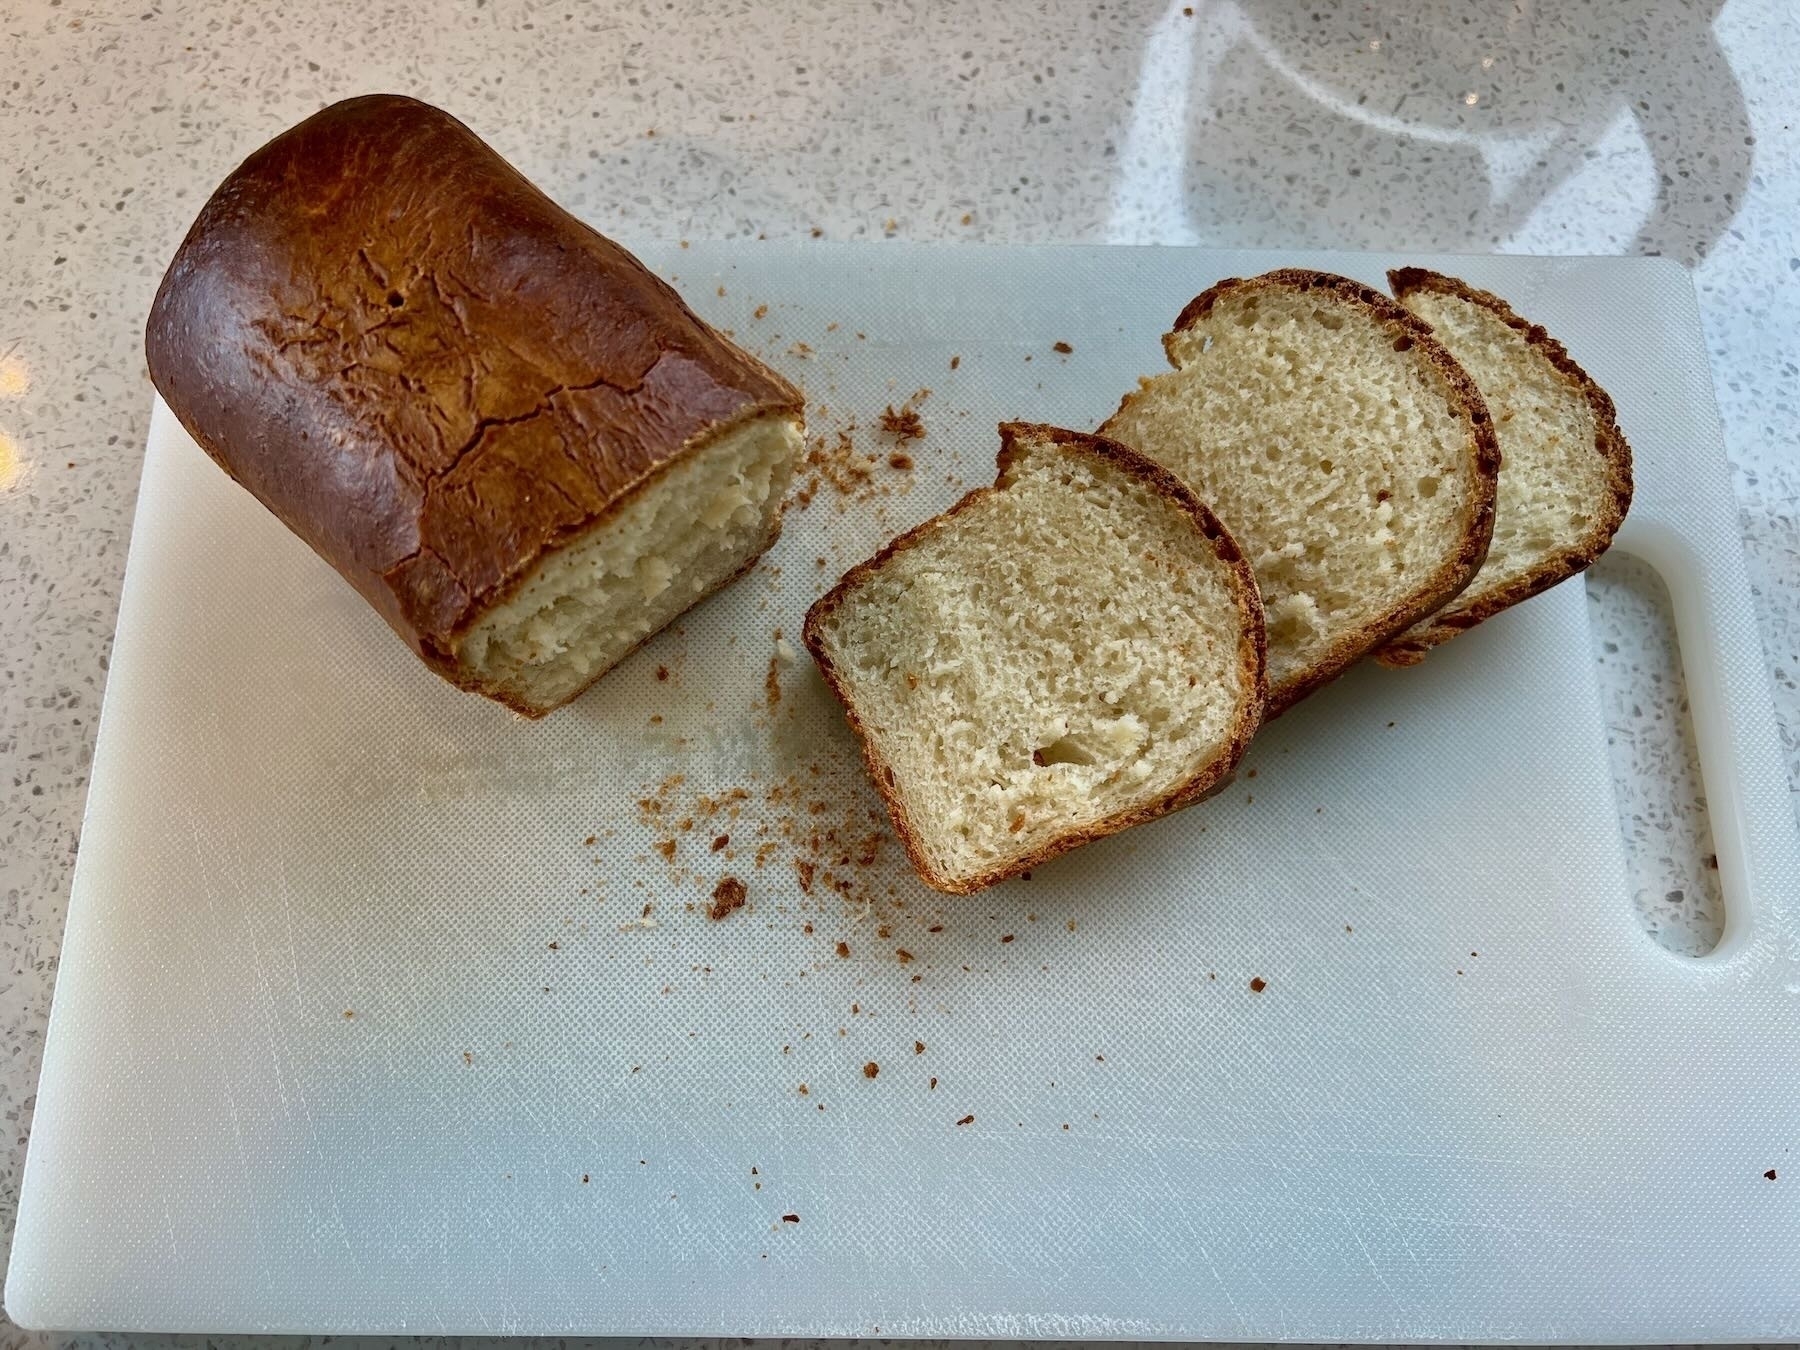 Finished loaf with slices cut. 